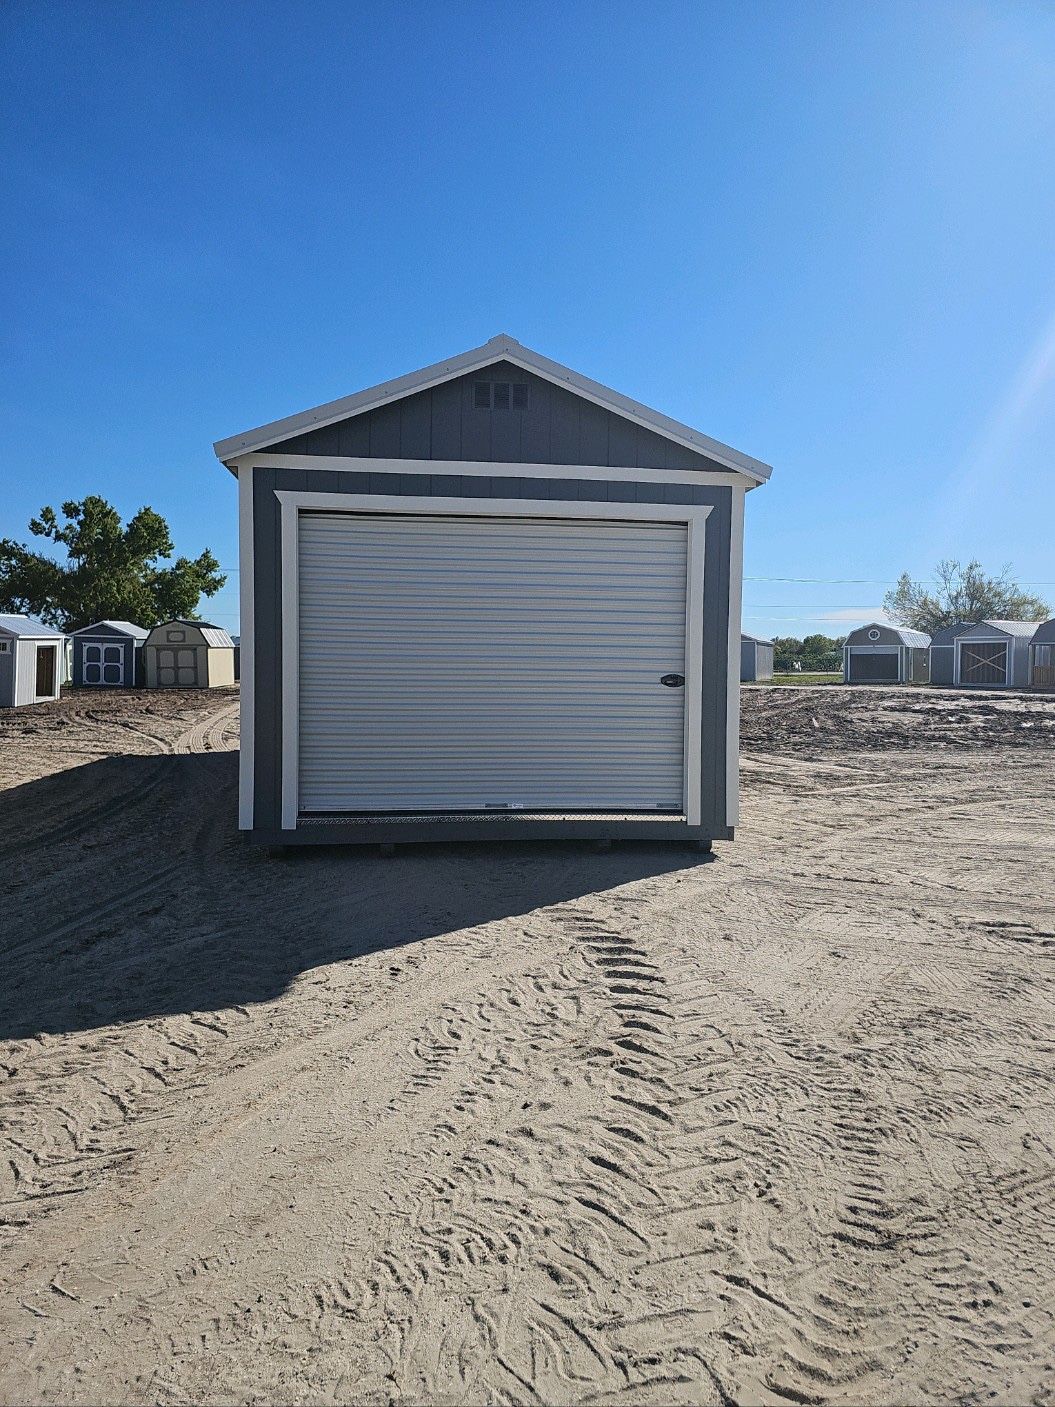 The 12x32 Garage Shed